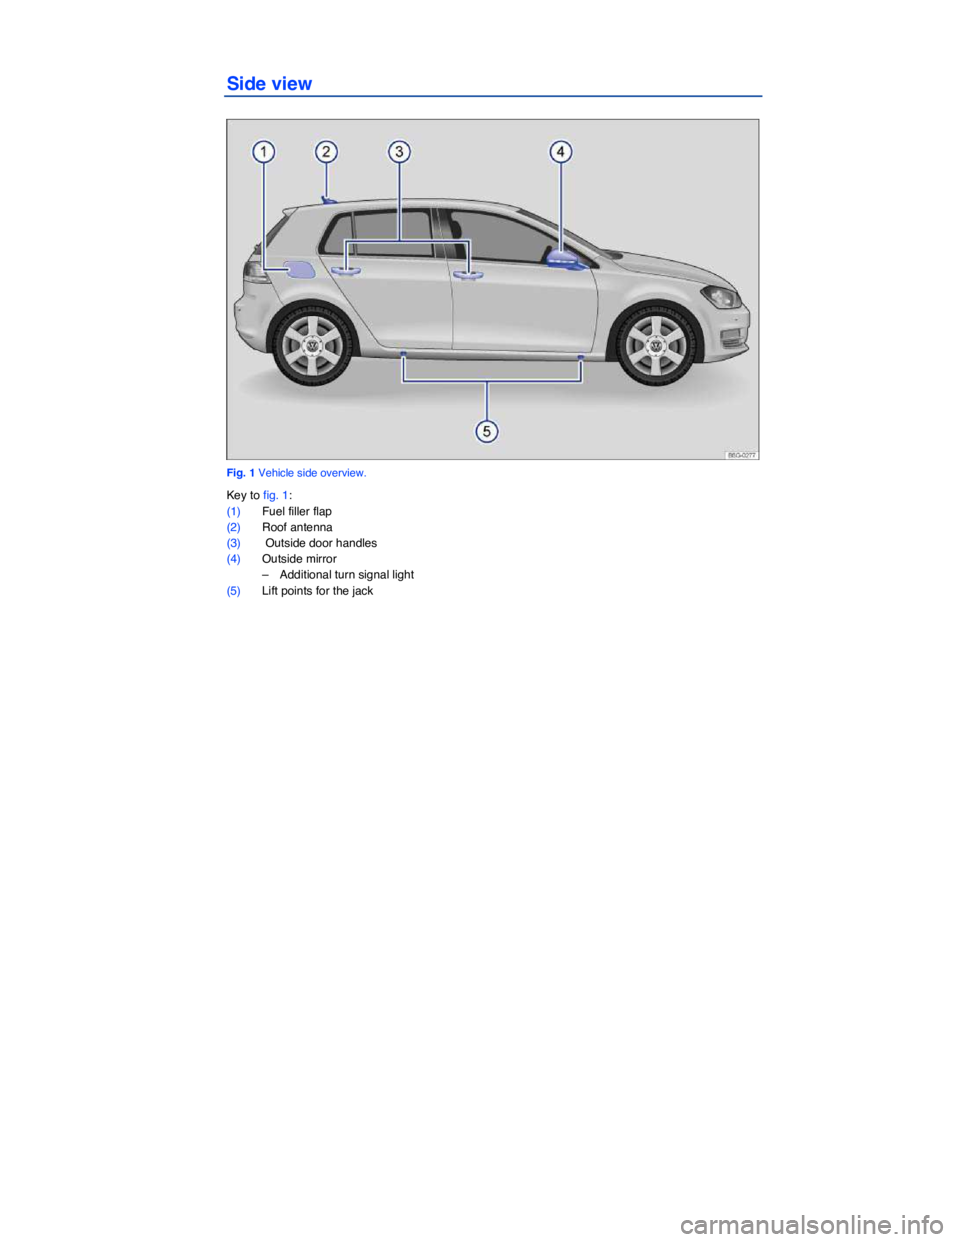 VOLKSWAGEN SCIROCCO 2013  Owners Manual   
Side view 
 
Fig. 1 Vehicle side overview. 
Key to fig. 1: 
(1) Fuel filler flap 
(2) Roof antenna  
(3)  Outside door handles  
(4) Outside mirror  
–  Additional turn signal light  
(5) Lift po